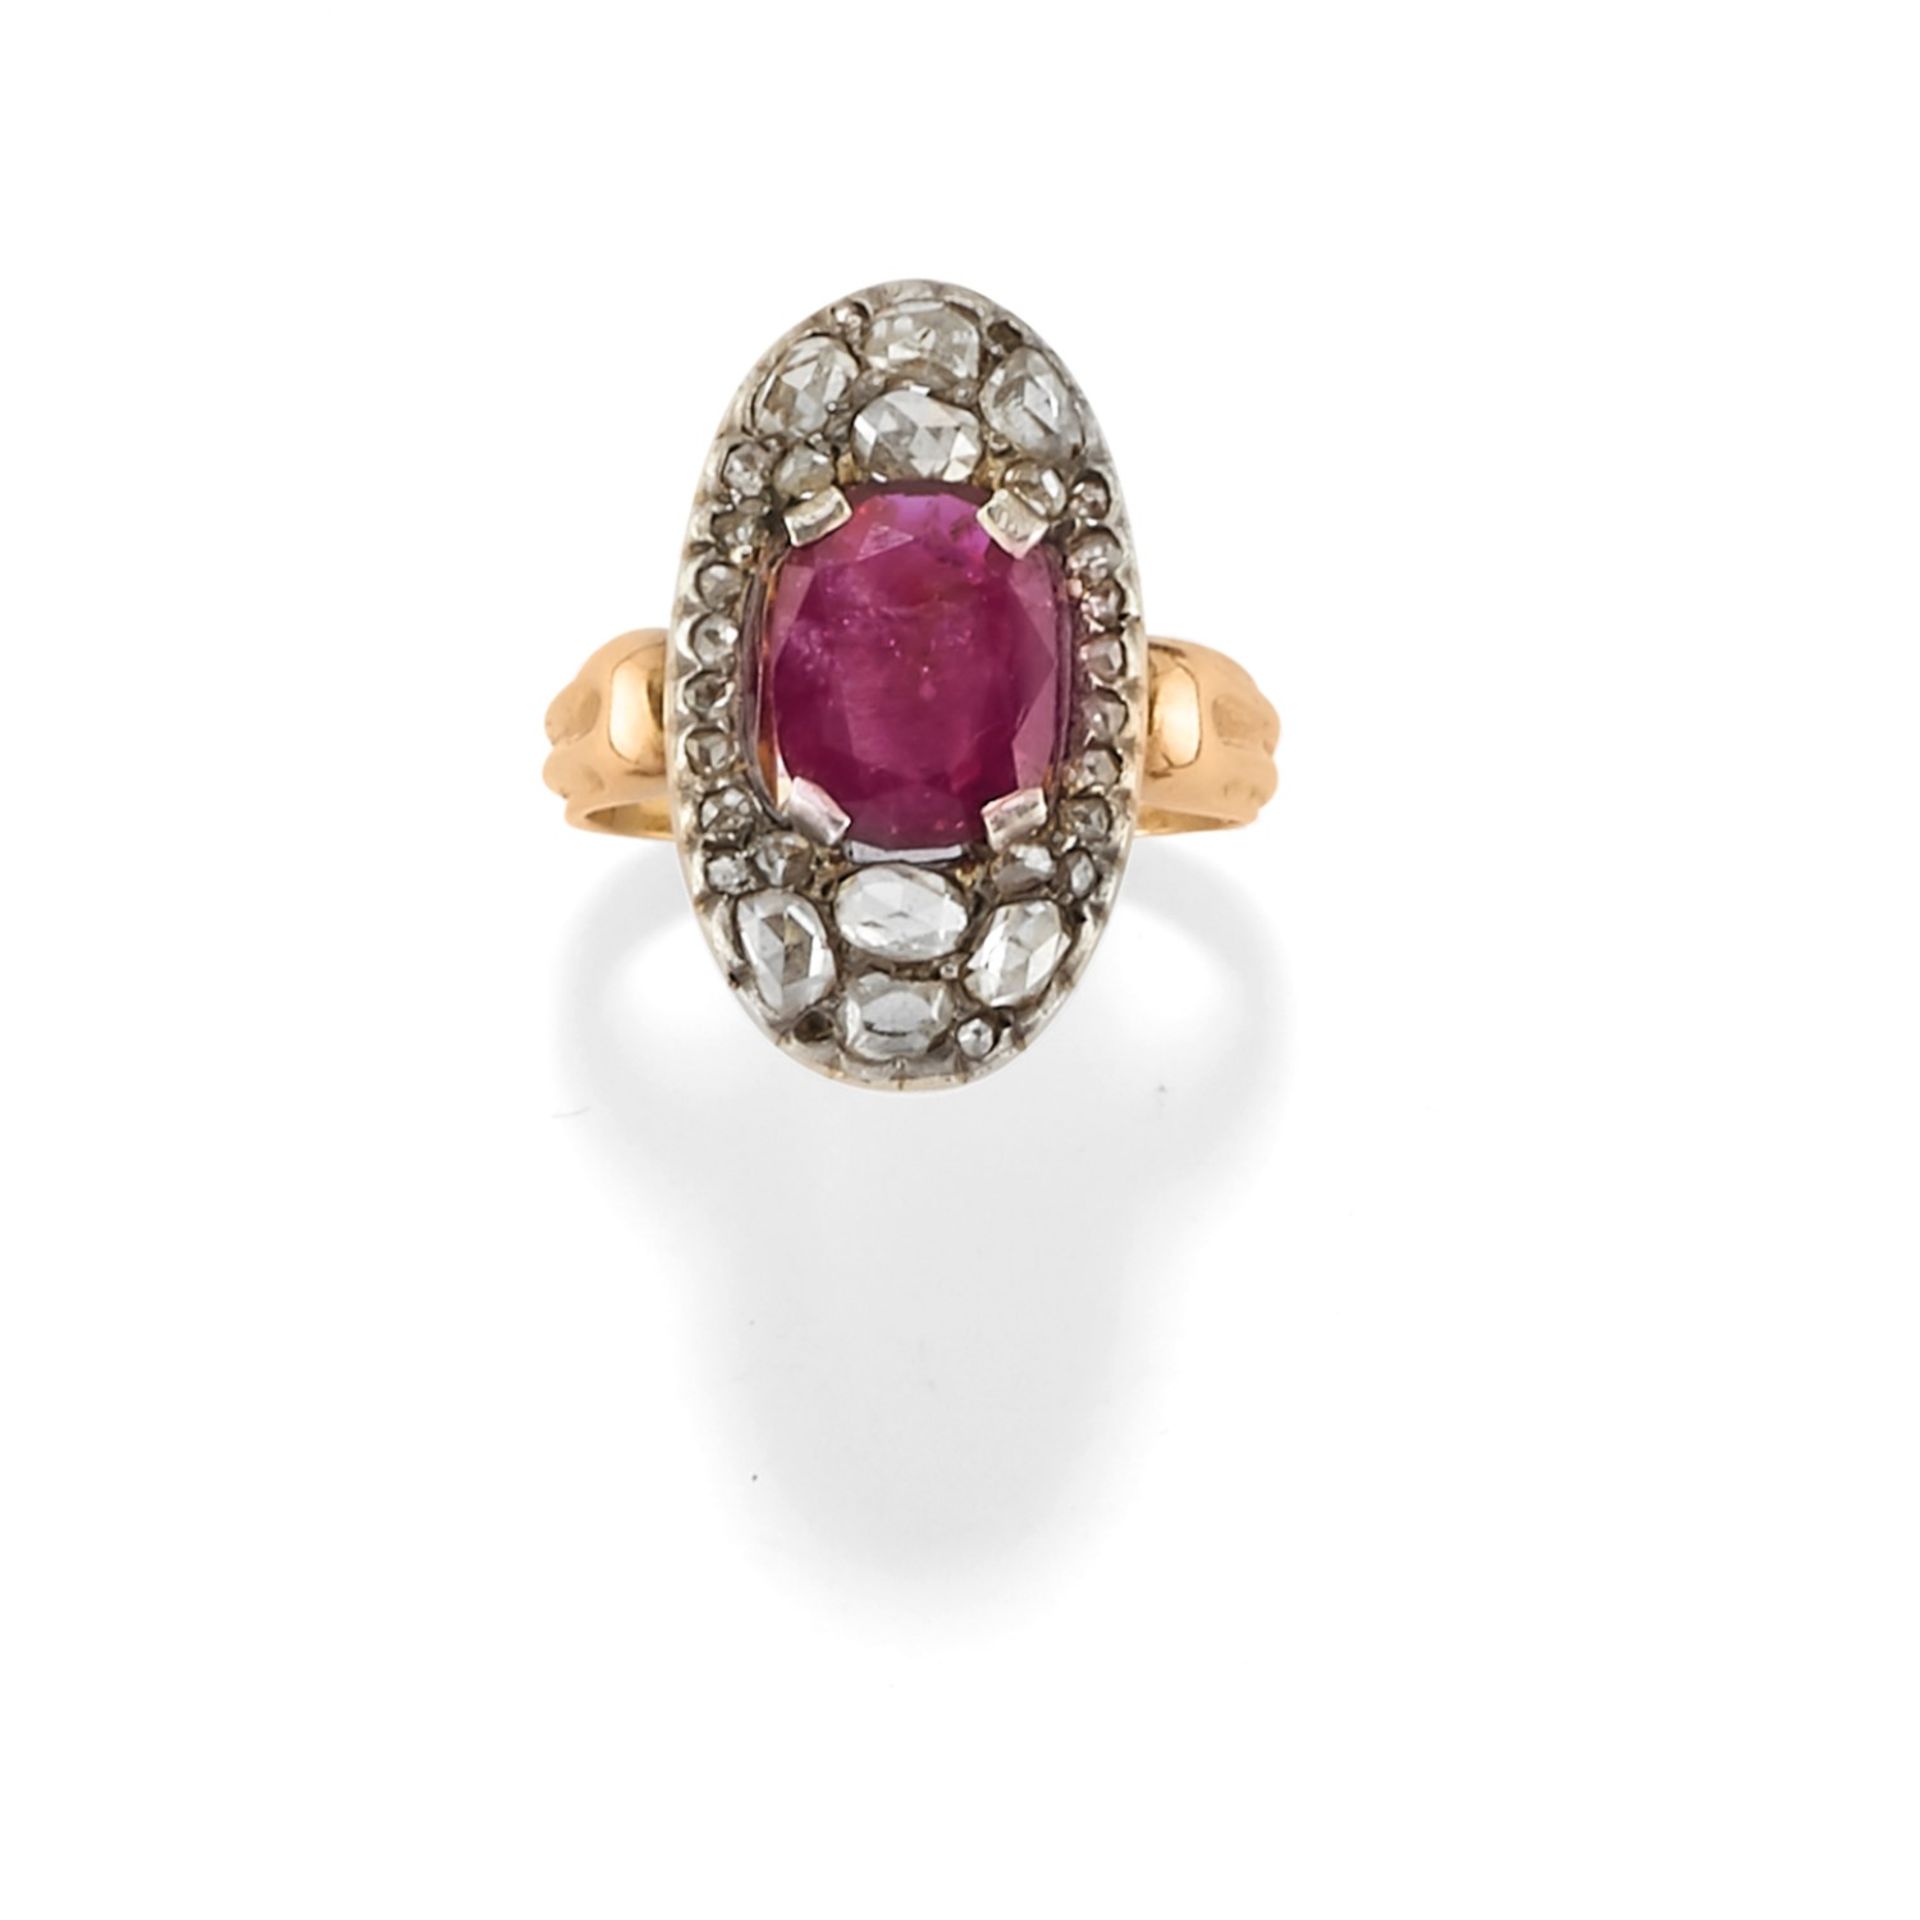 A silver, 18K yellow gold, ruby and diamond ring, first half of 20th Century - A [...]